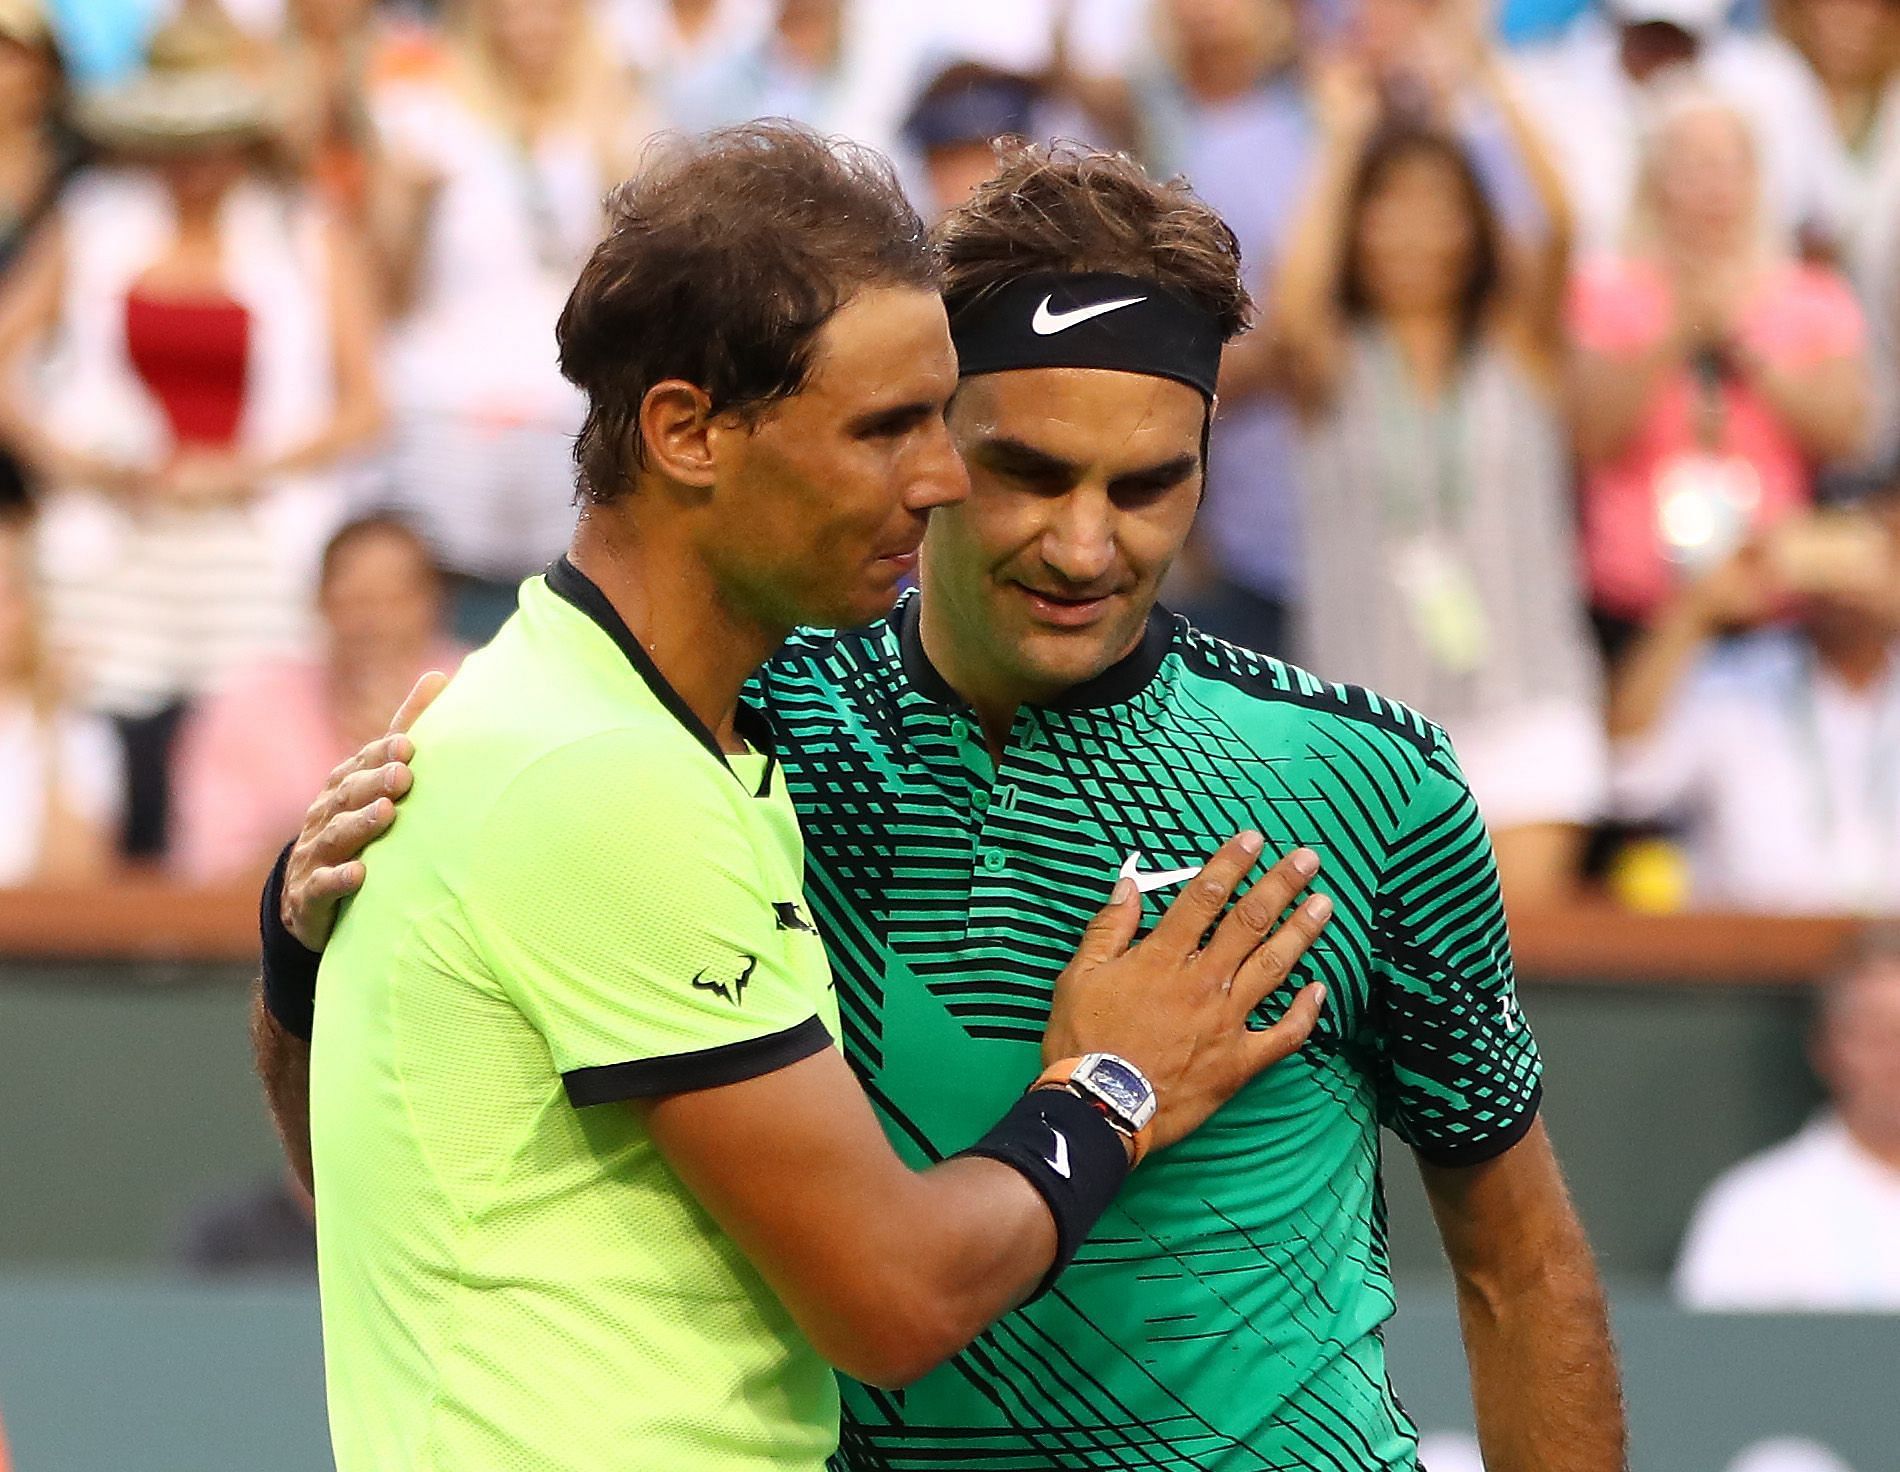 Rivals and Friends - Roger Federer and Rafael Nadal